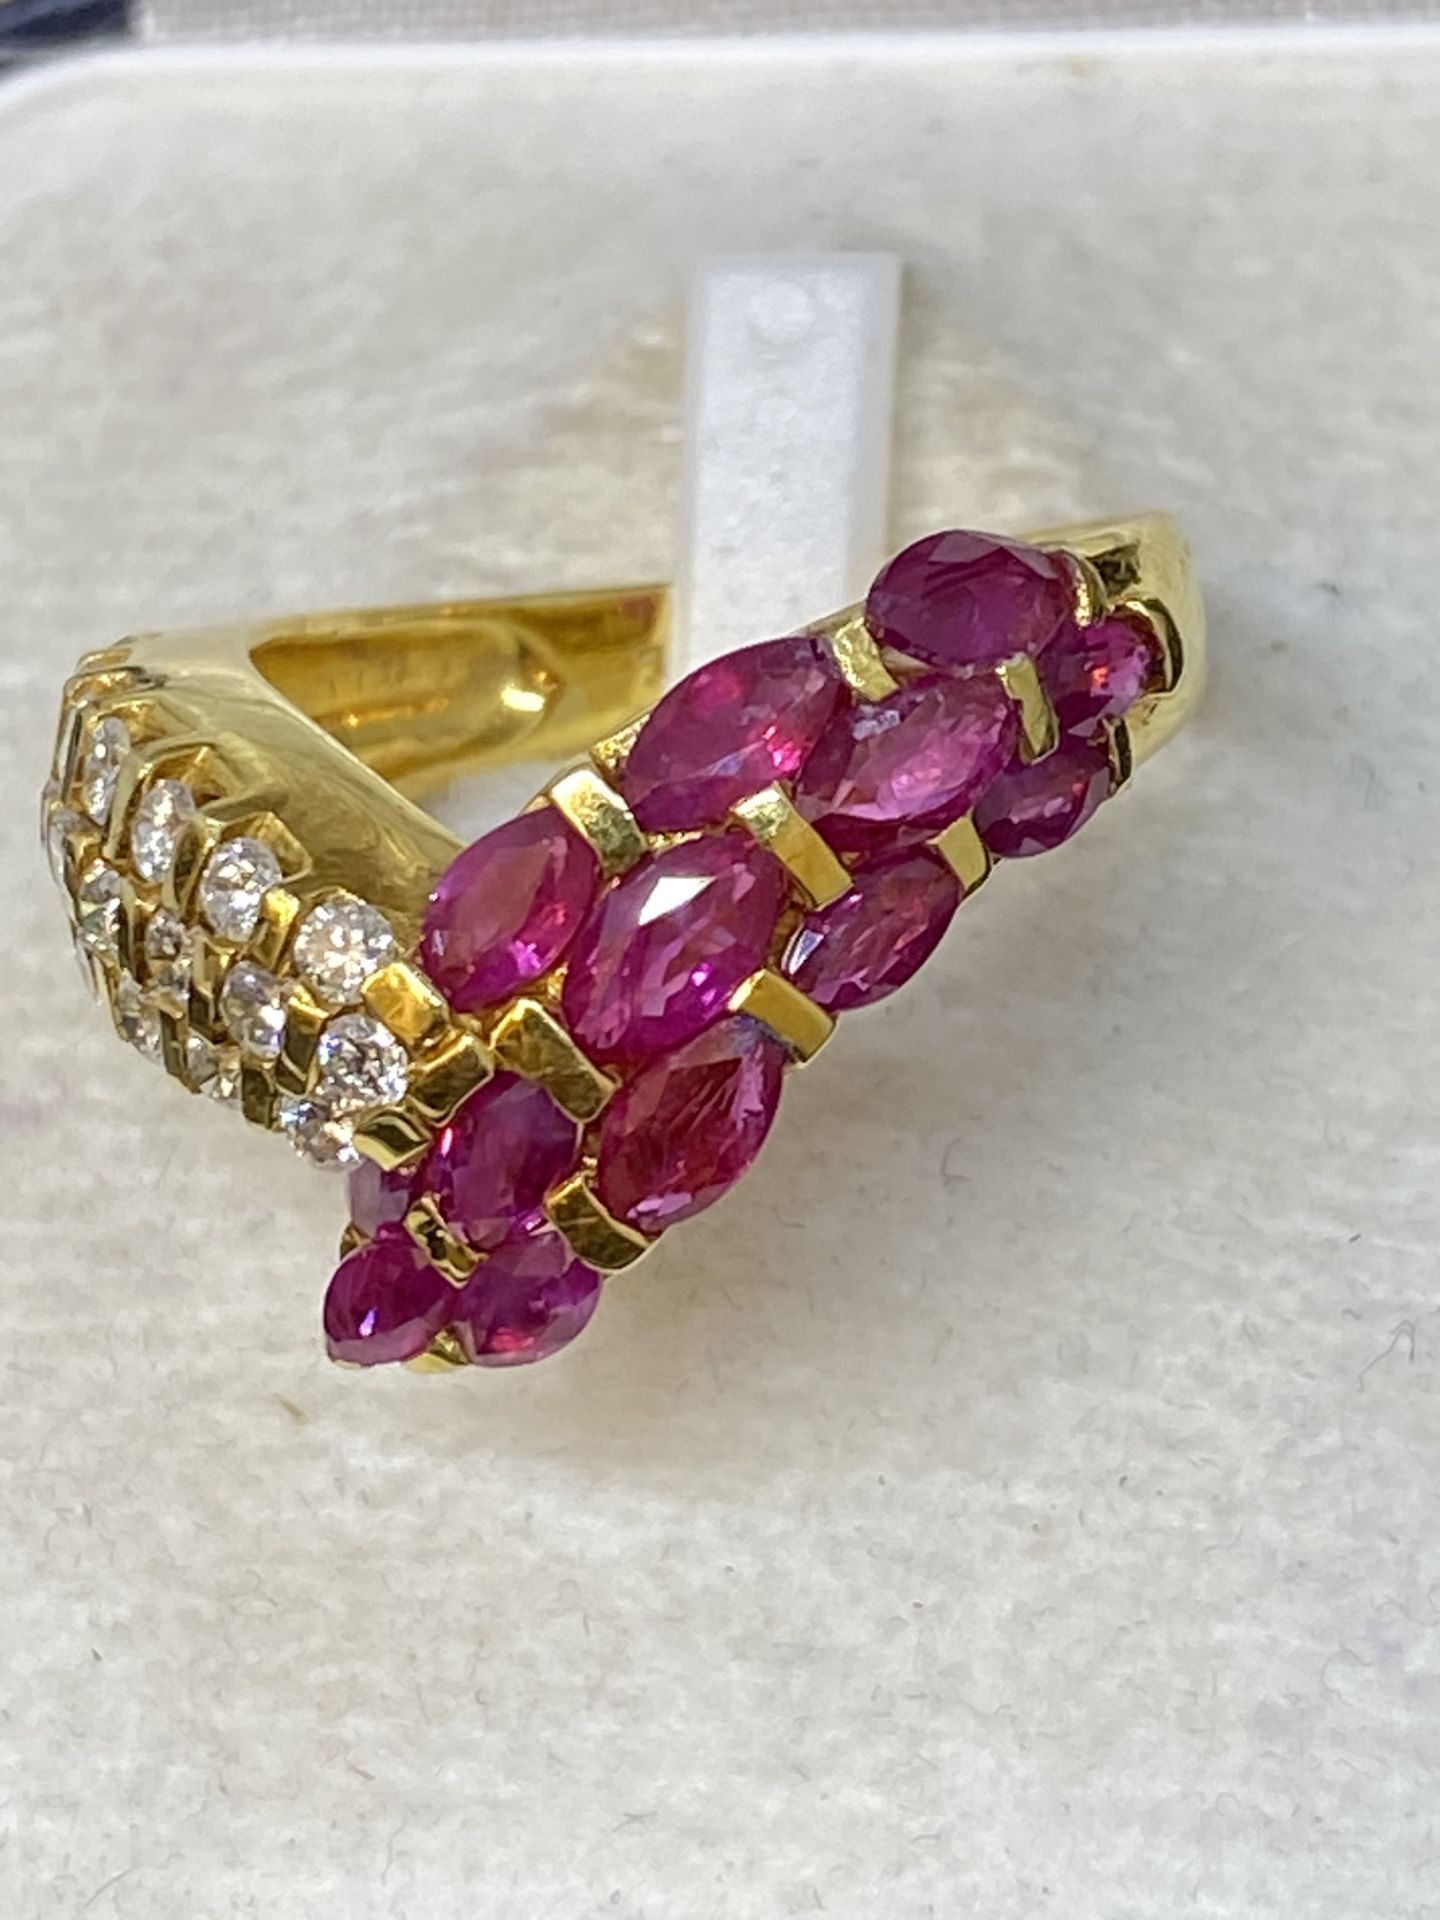 18ct GOLD 1.80ct RUBY & 0.90ct DIAMOND RING - 6.3 GRAMS - Image 2 of 5